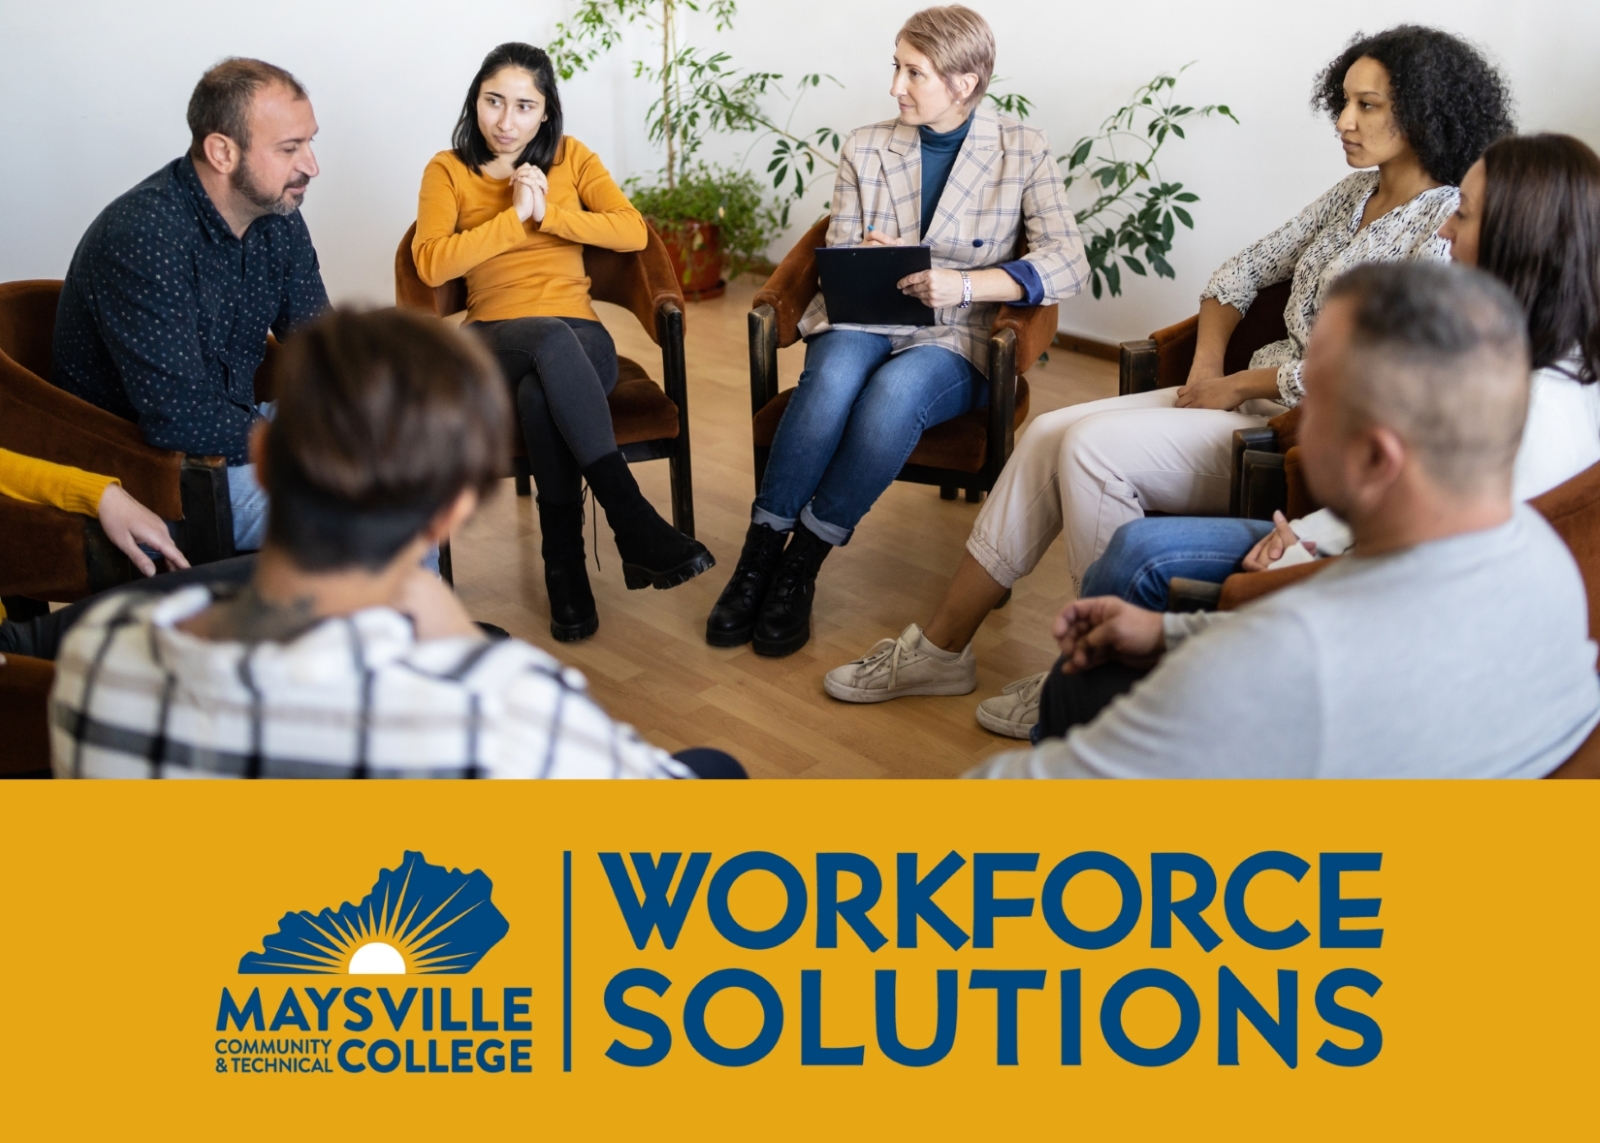 group of people sitting in a circle with the MCTC Workforce Solutions logo at the bottom